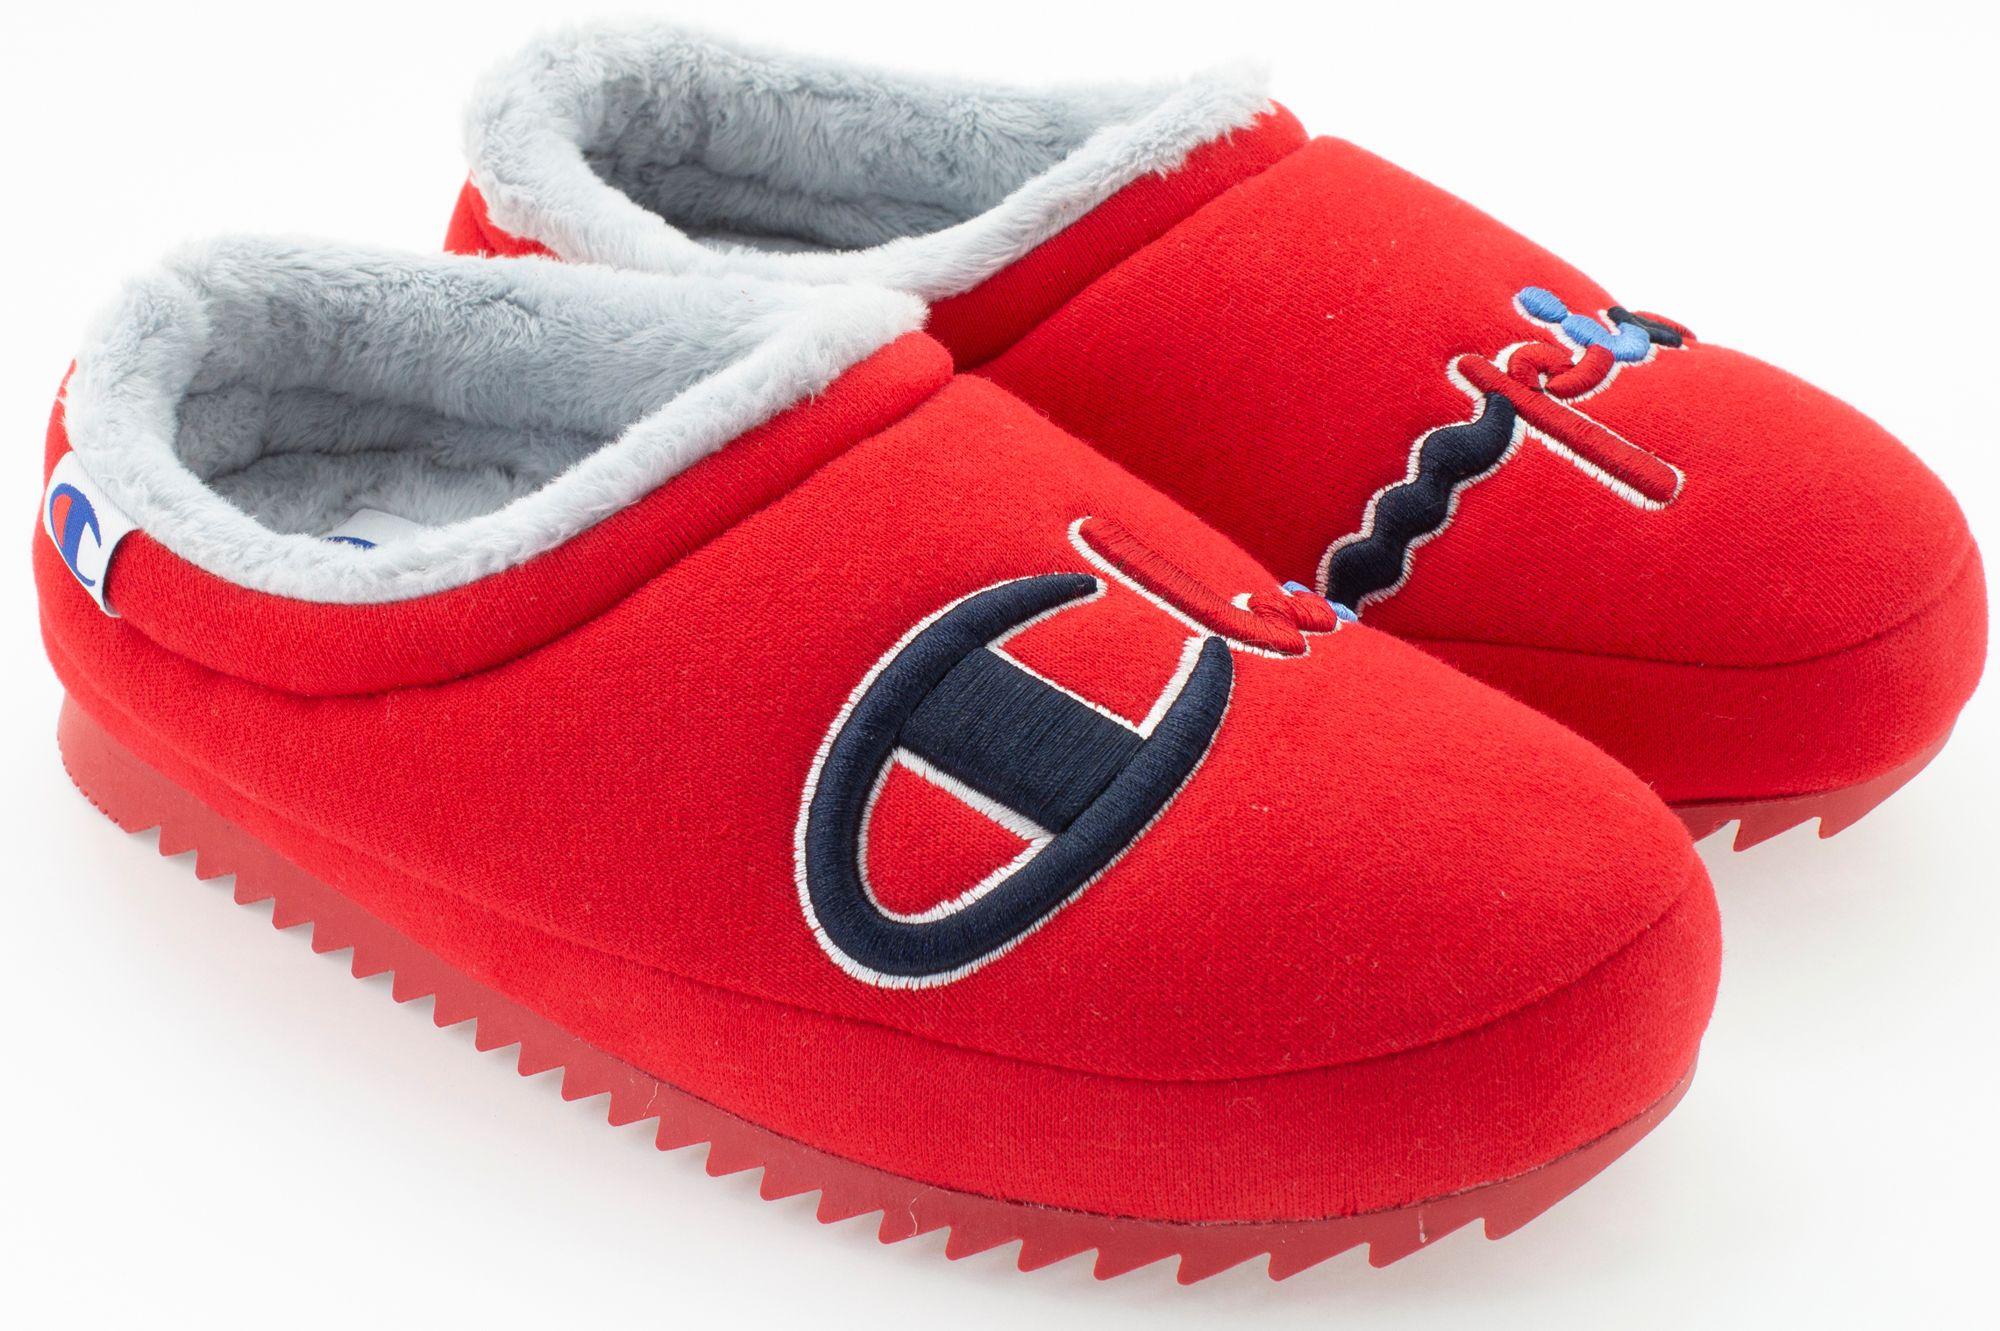 Champion Ugg Slippers Factory Sale, 59% OFF | www.bculinarylab.com